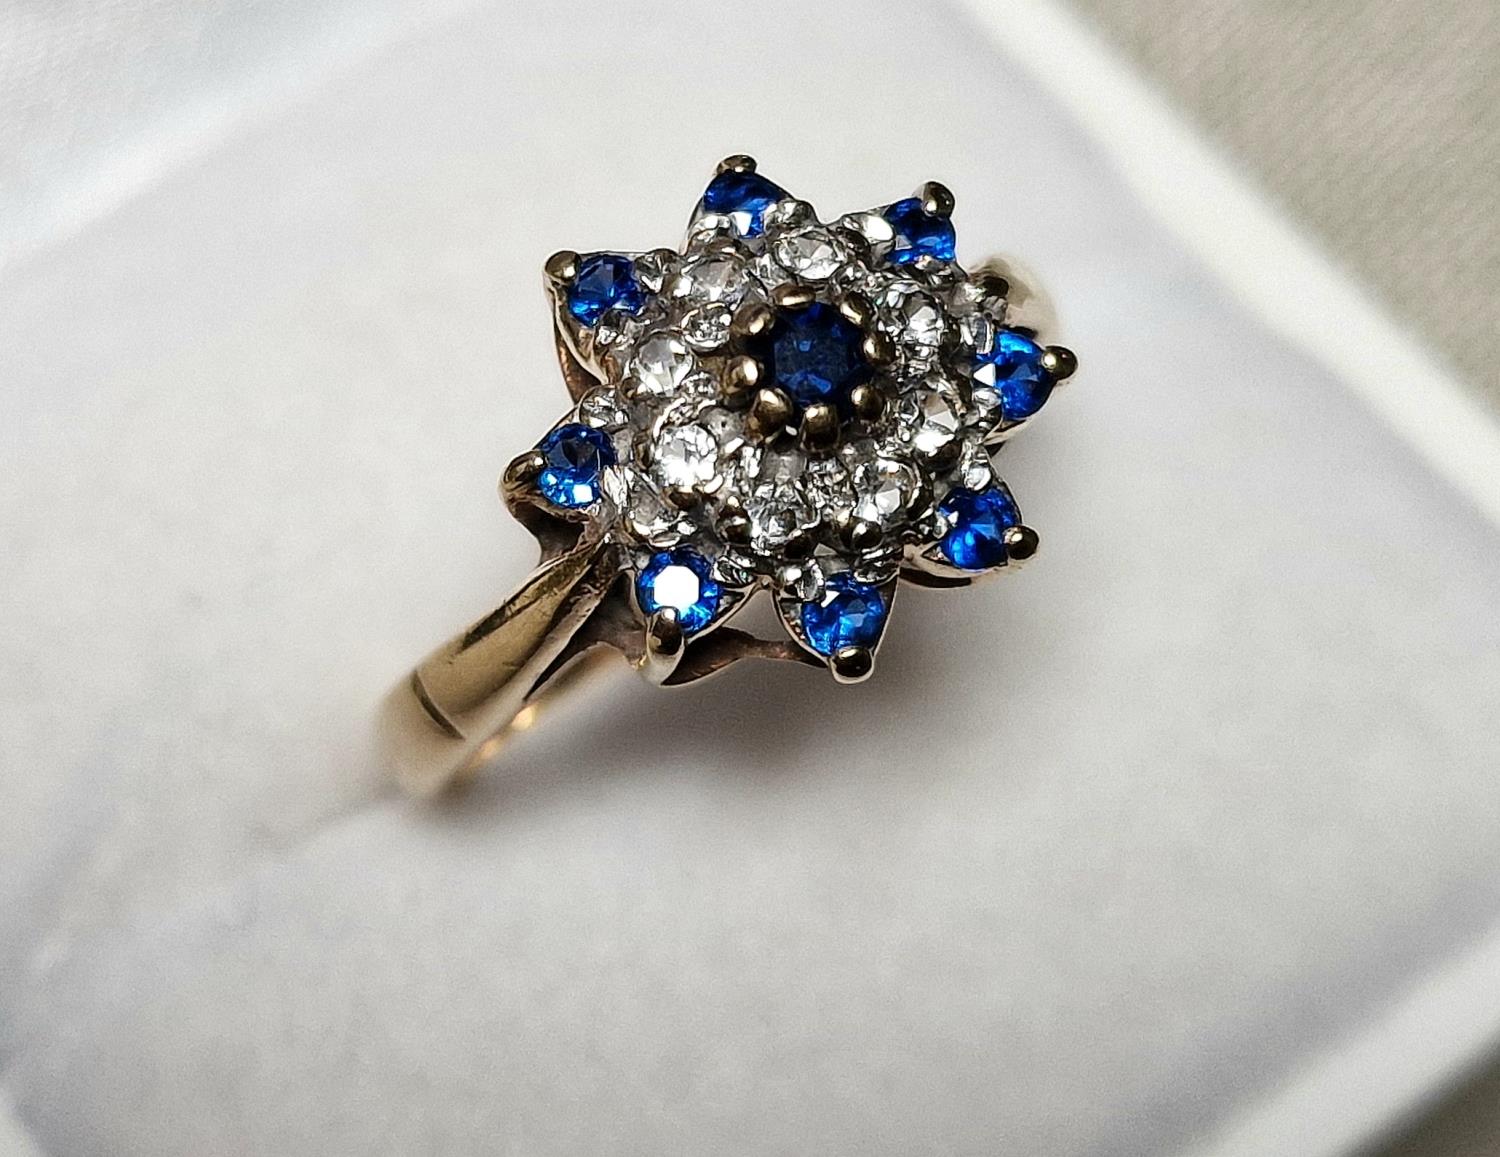 9ct Gold, Diamond & Sapphire Cluster Ring, size O+0.5 & 3g